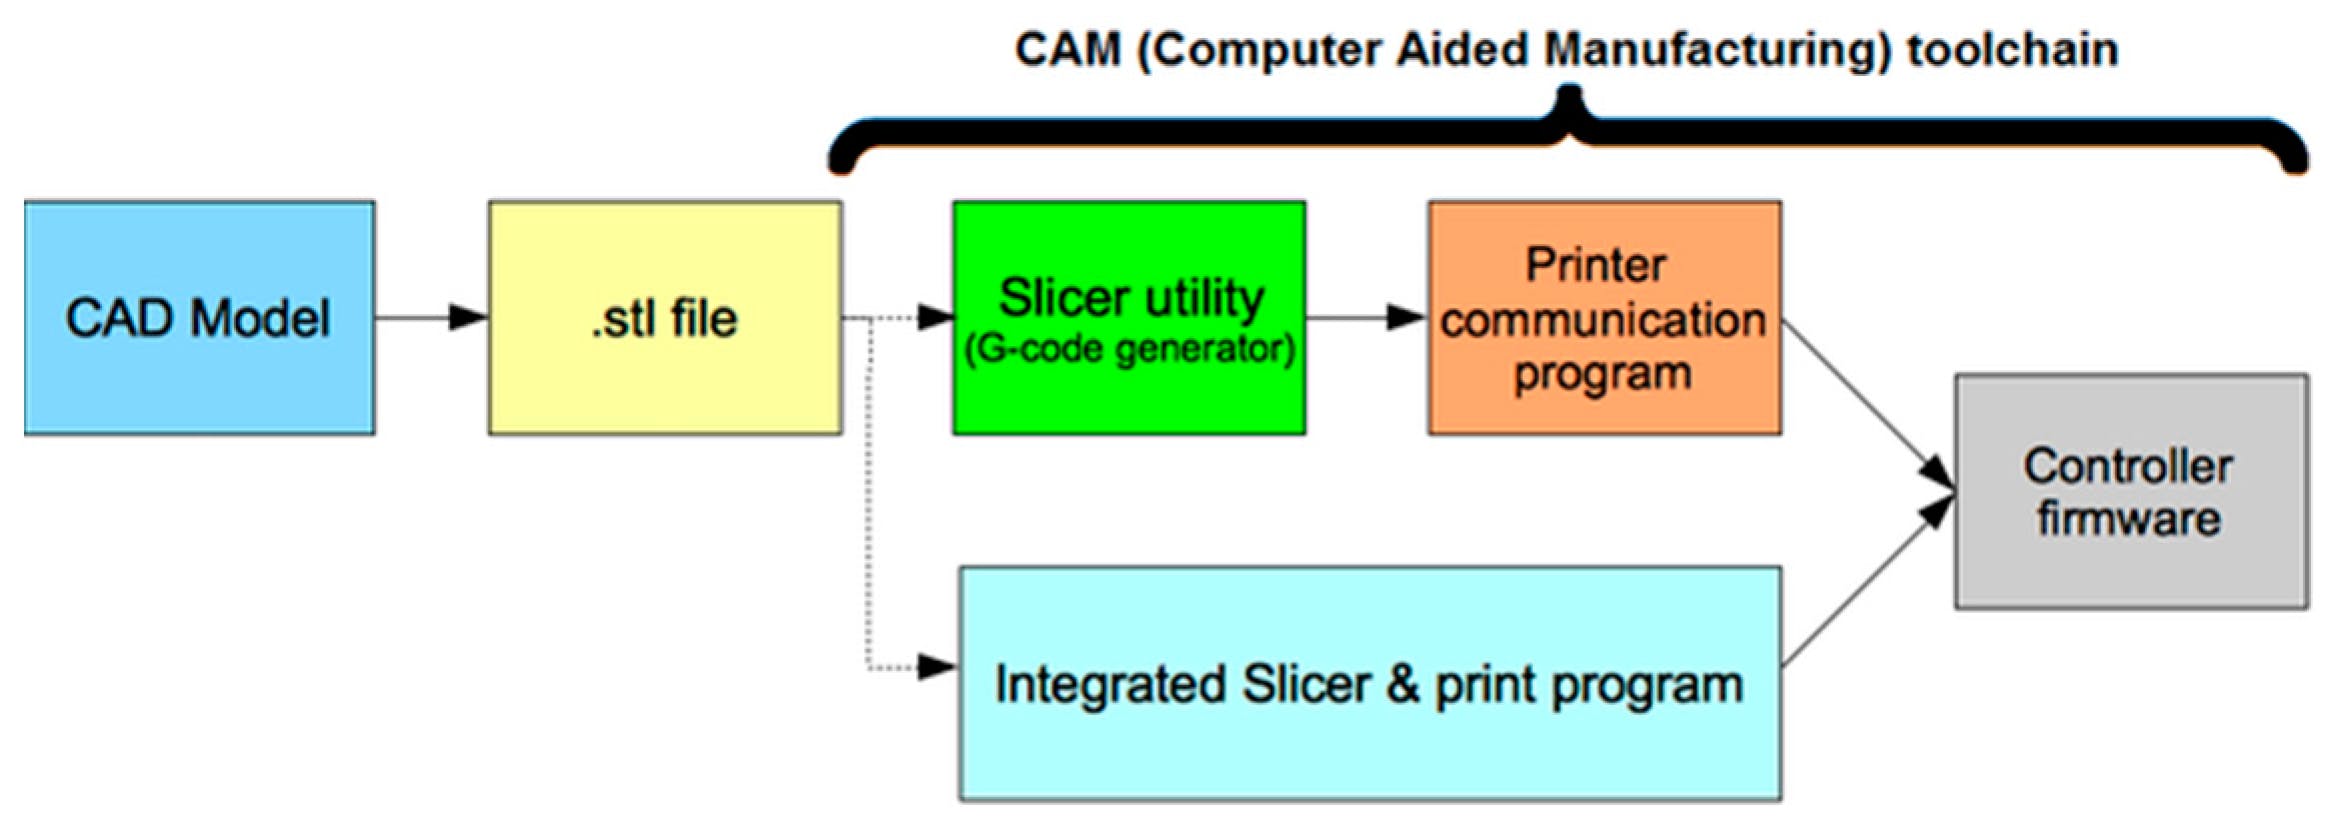 How G-code Works: 10 Critical Commands for 3D Printing